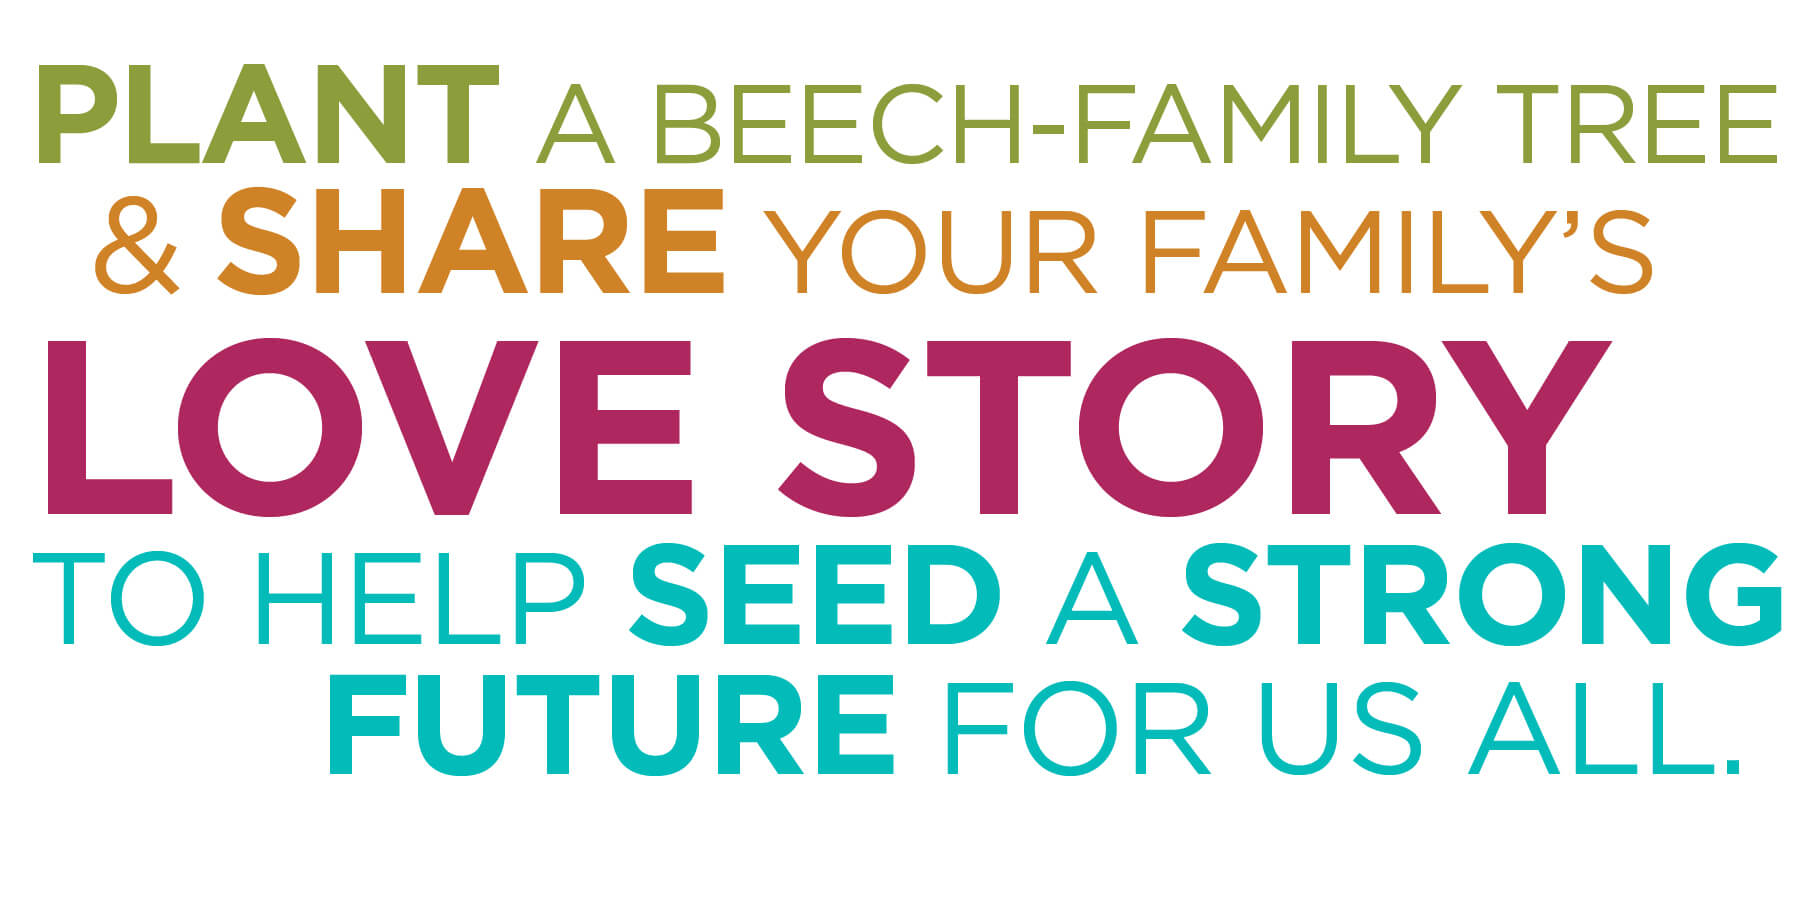 Plant a beech tree and share your family's love story to help seed a strong future for us all.